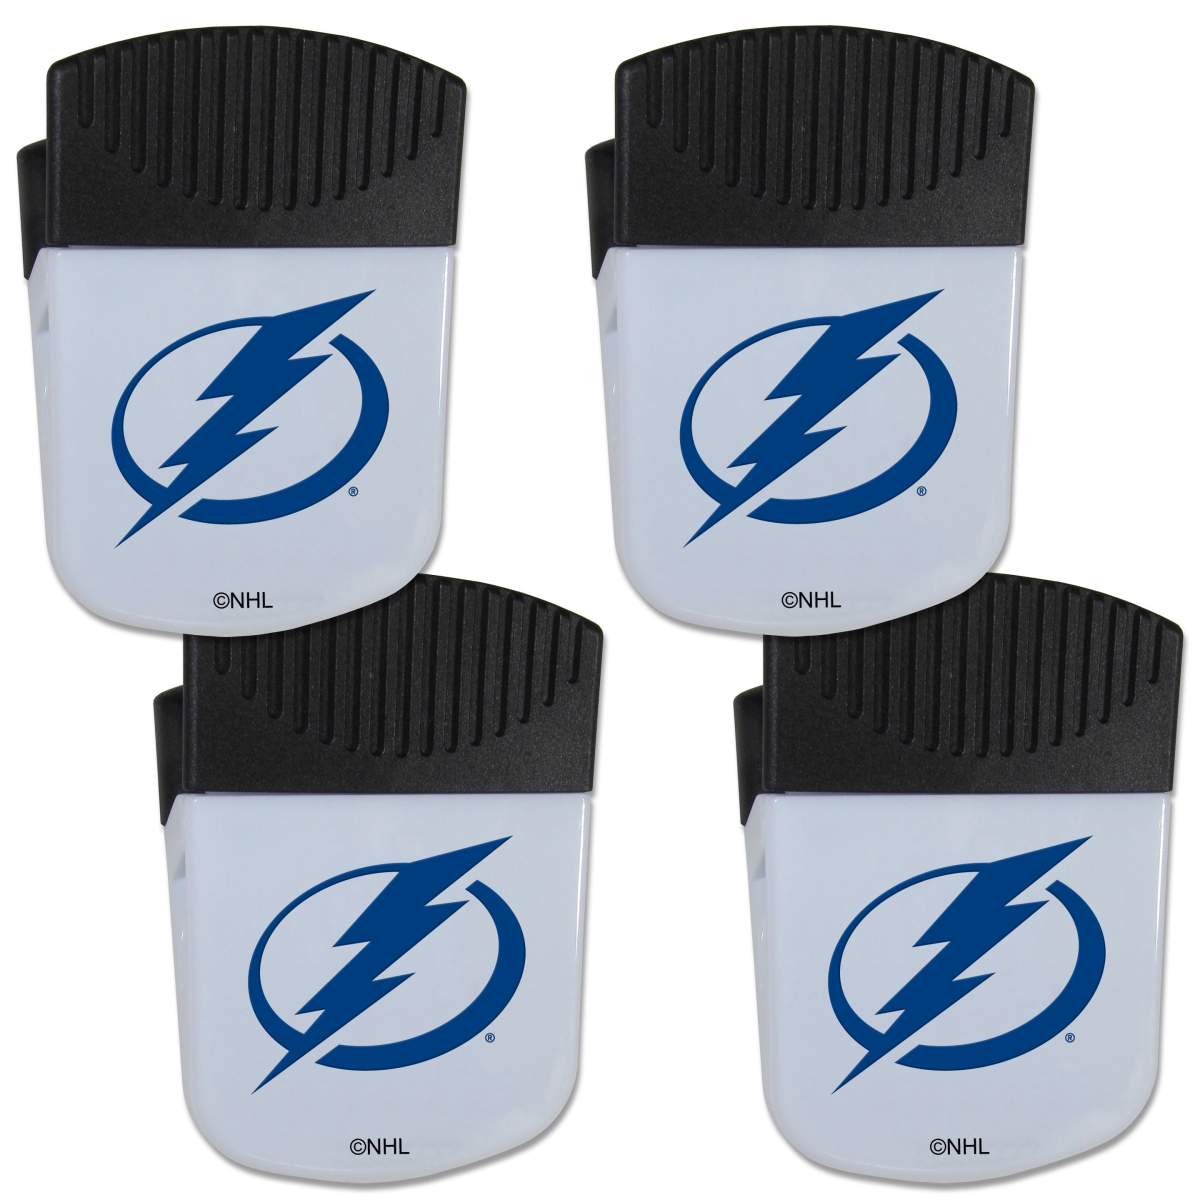 Picture of Siskiyou 4HPMC80 Unisex NHL Tampa Bay Lightning Chip Clip Magnet with Bottle Opener - Pack of 4